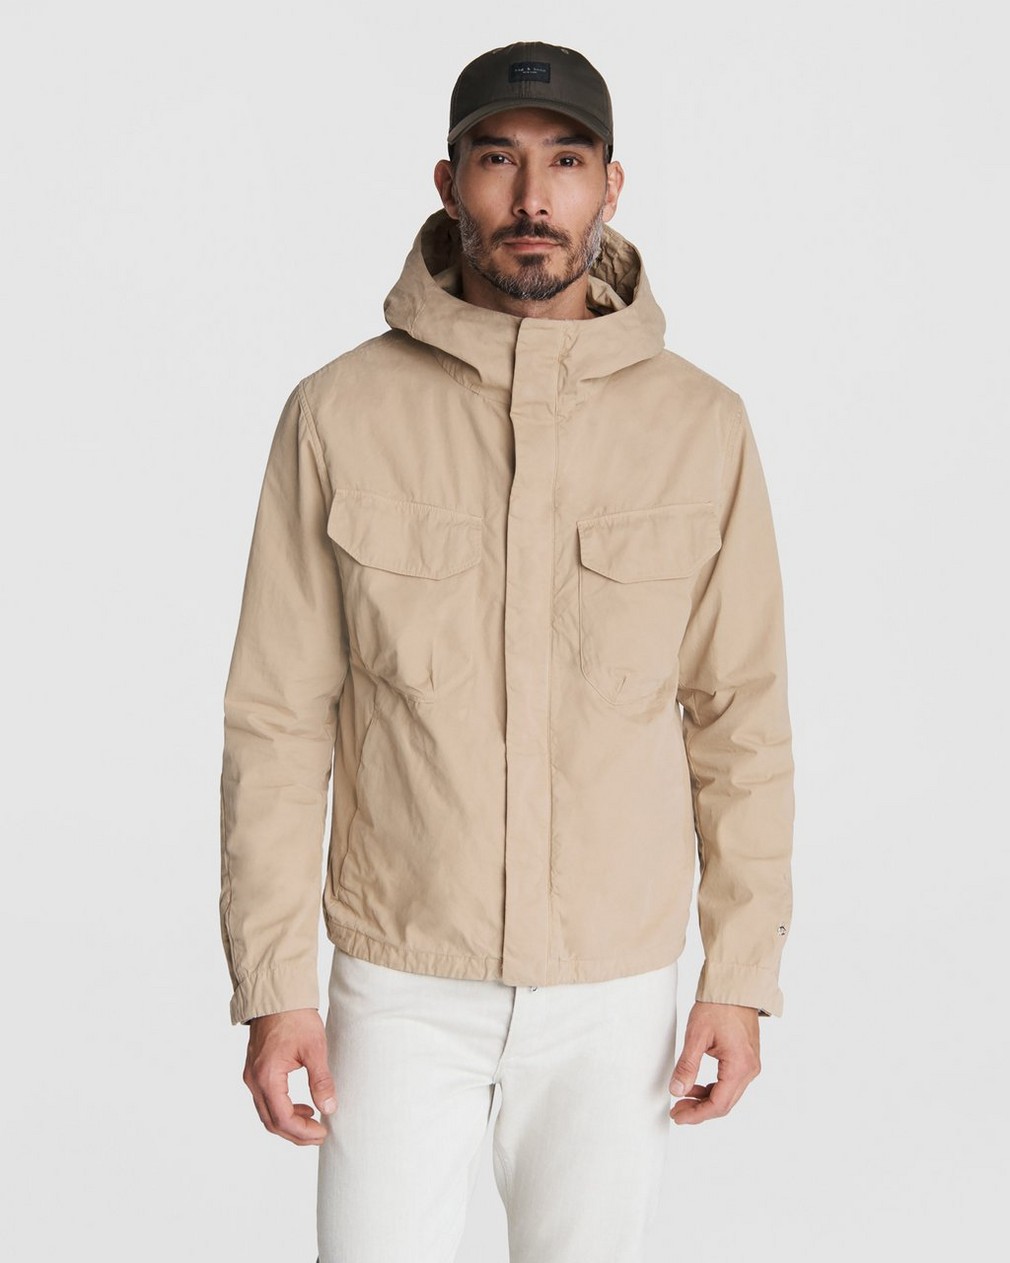 Tactic Peached Cotton Jacket